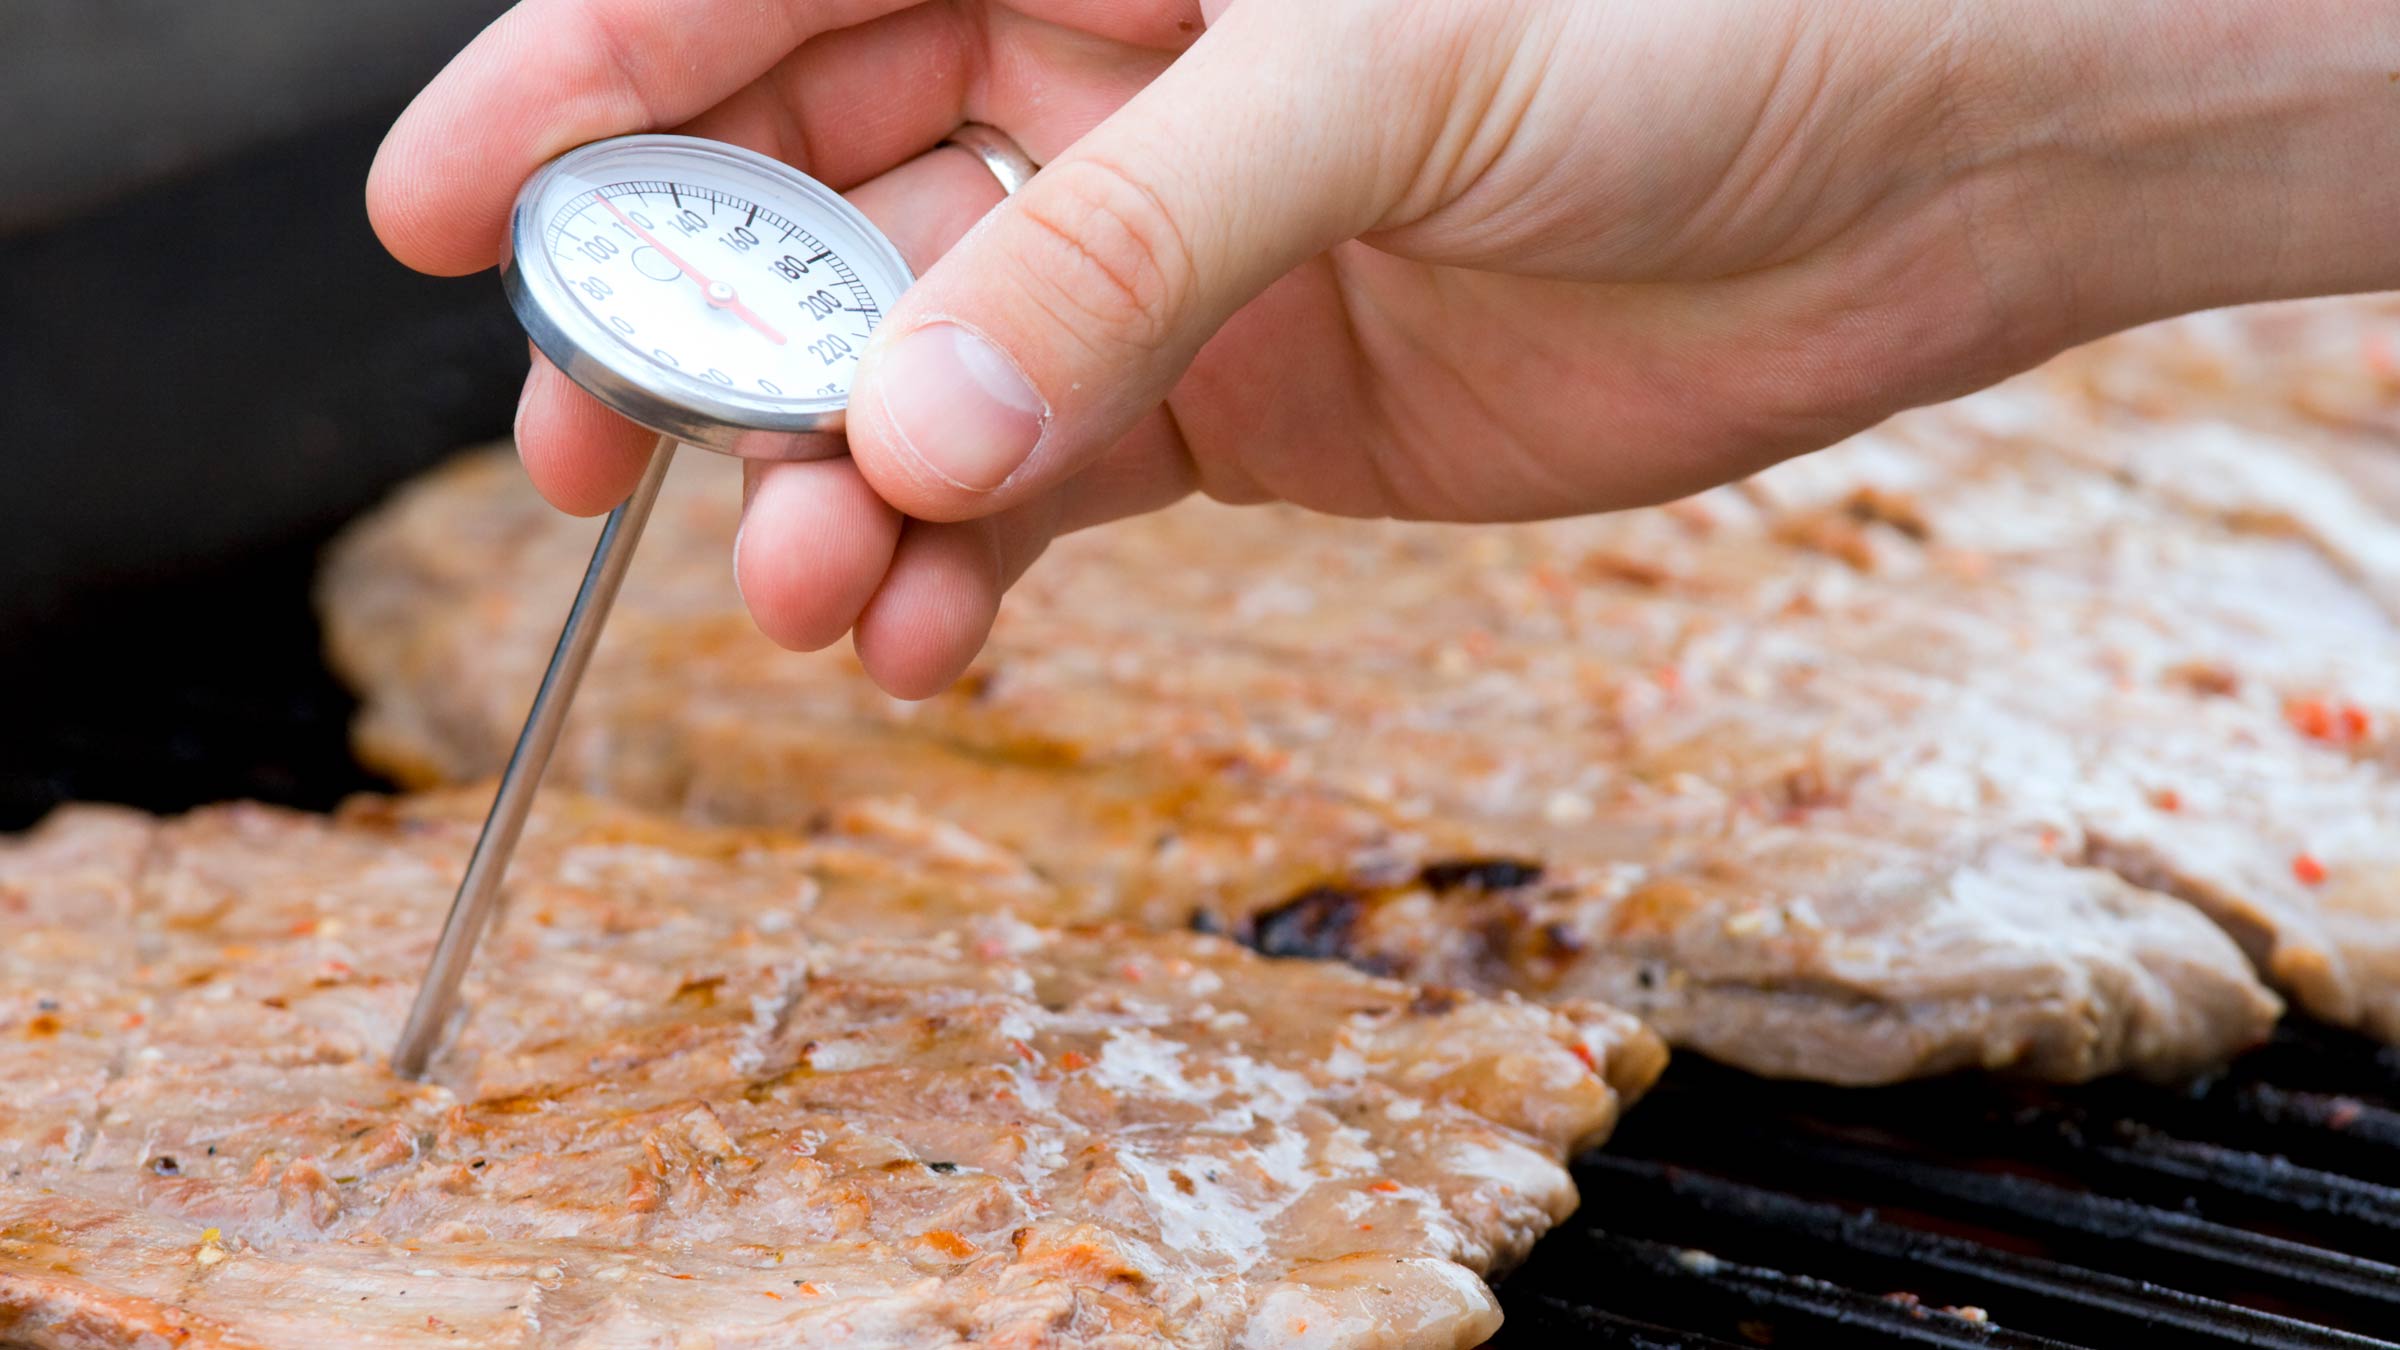 Person using meat thermometer to check food temperature 